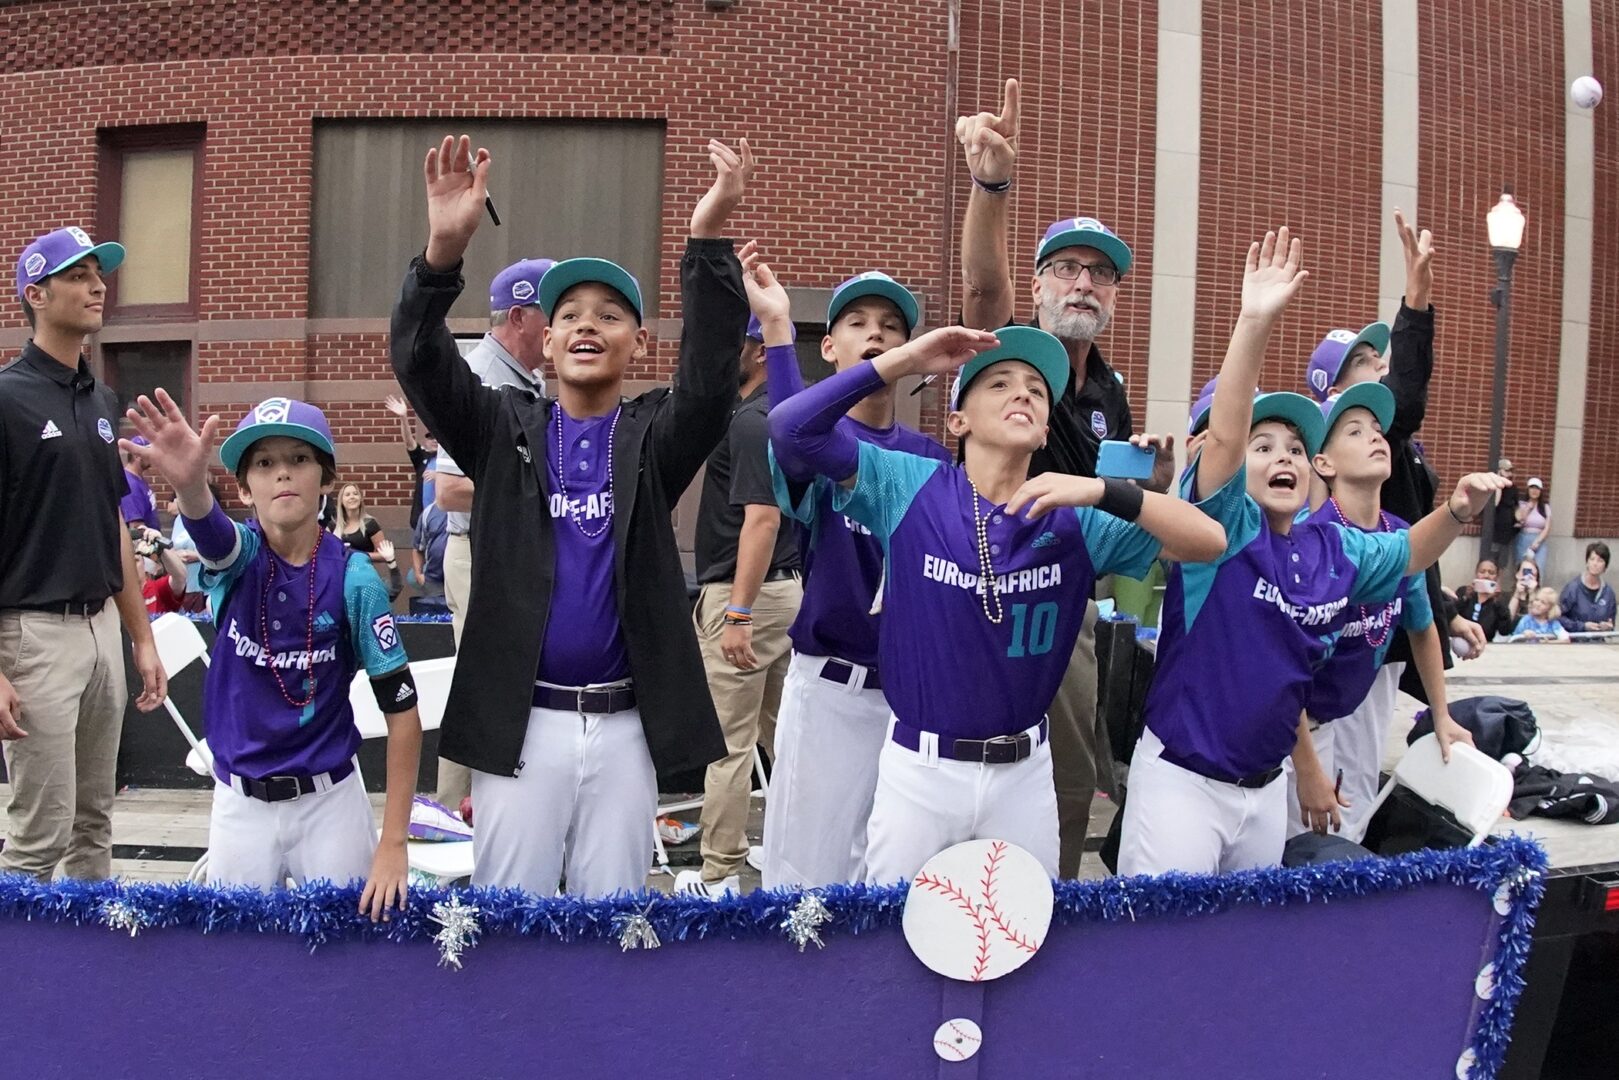 Little League World Series is back with 4 more teams in Williamsport WITF